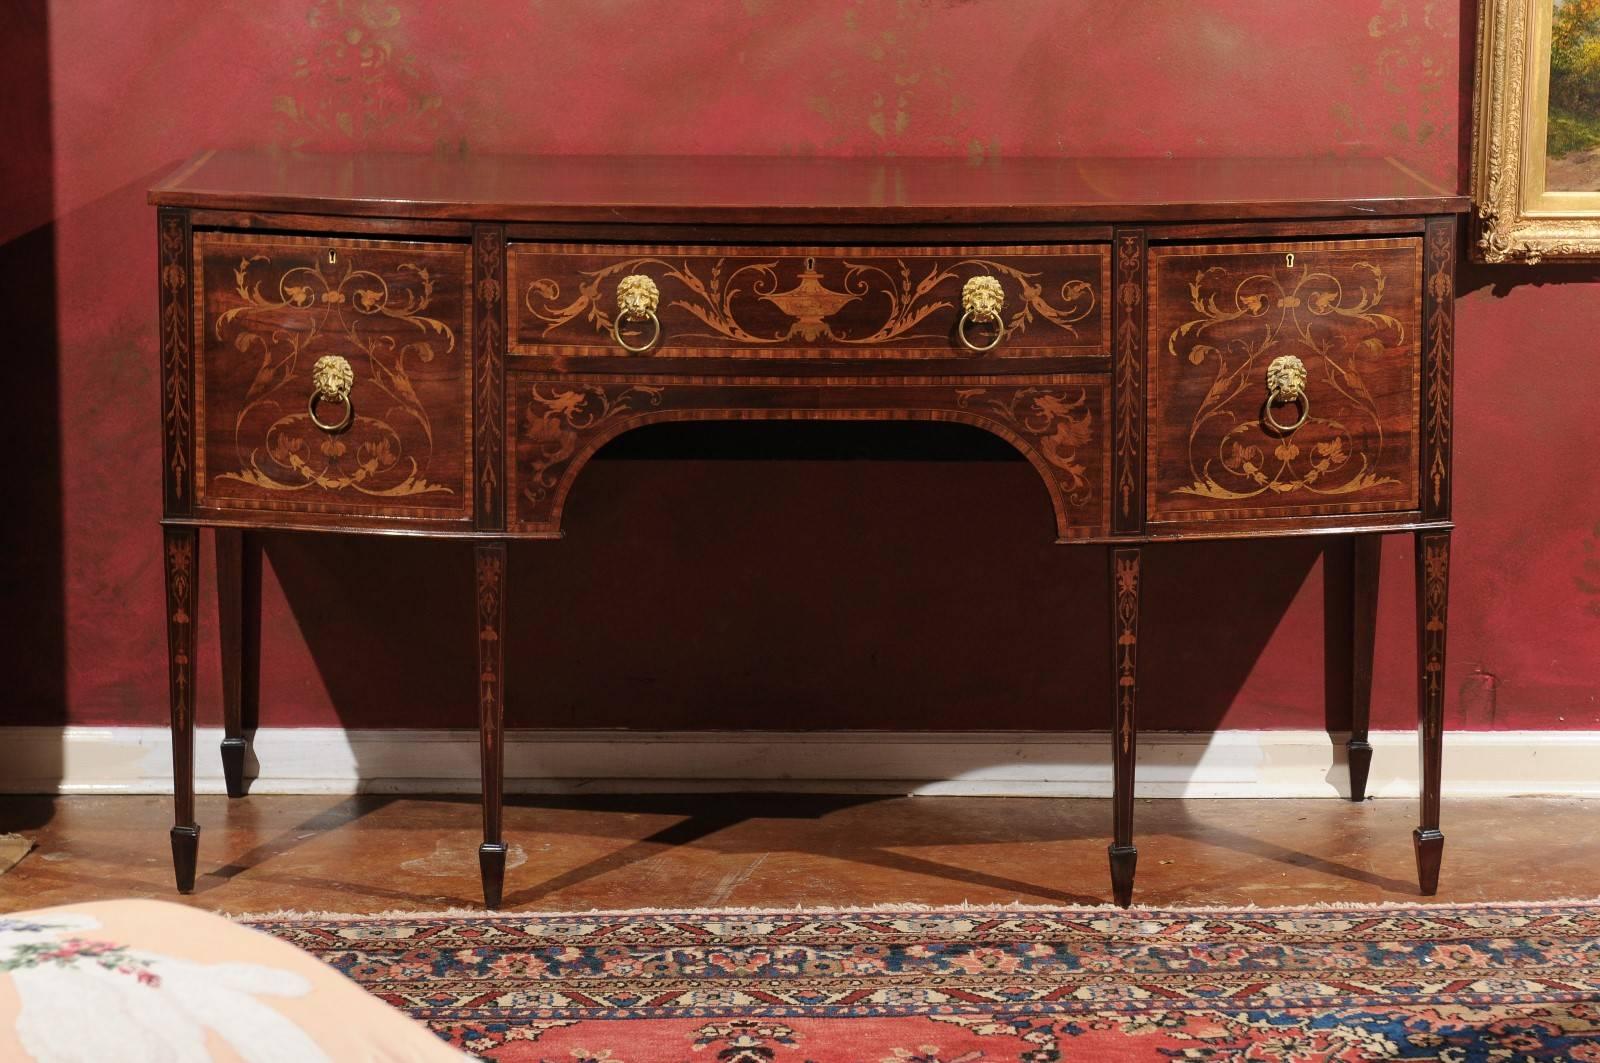 Exquisite mahogany bowfront sideboard adorned with beautiful marquetry inlay on the front and down the tapered legs. Satinwood banding is on the top as well as the sides. There is a centre long drawer and two doors on either side. Lion head pulls.